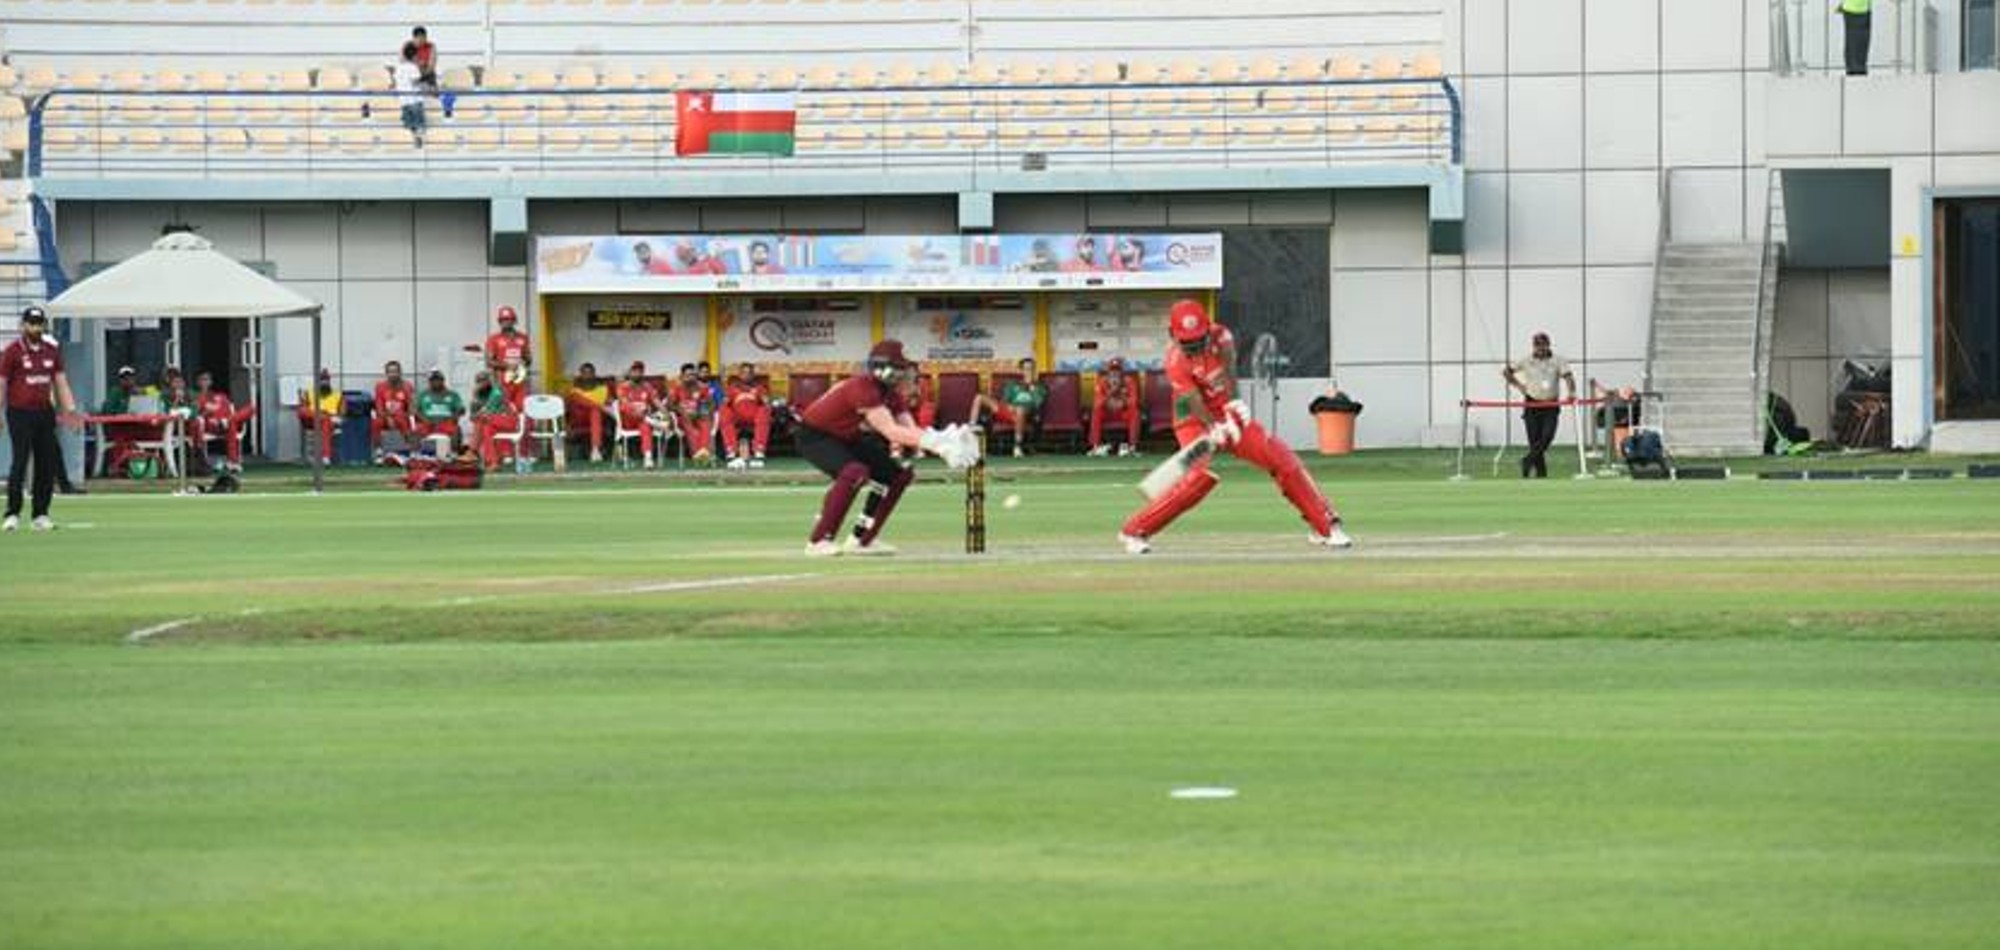 Qatar Loses to Oman in opening match at T20I Gulf Cricket Championship 